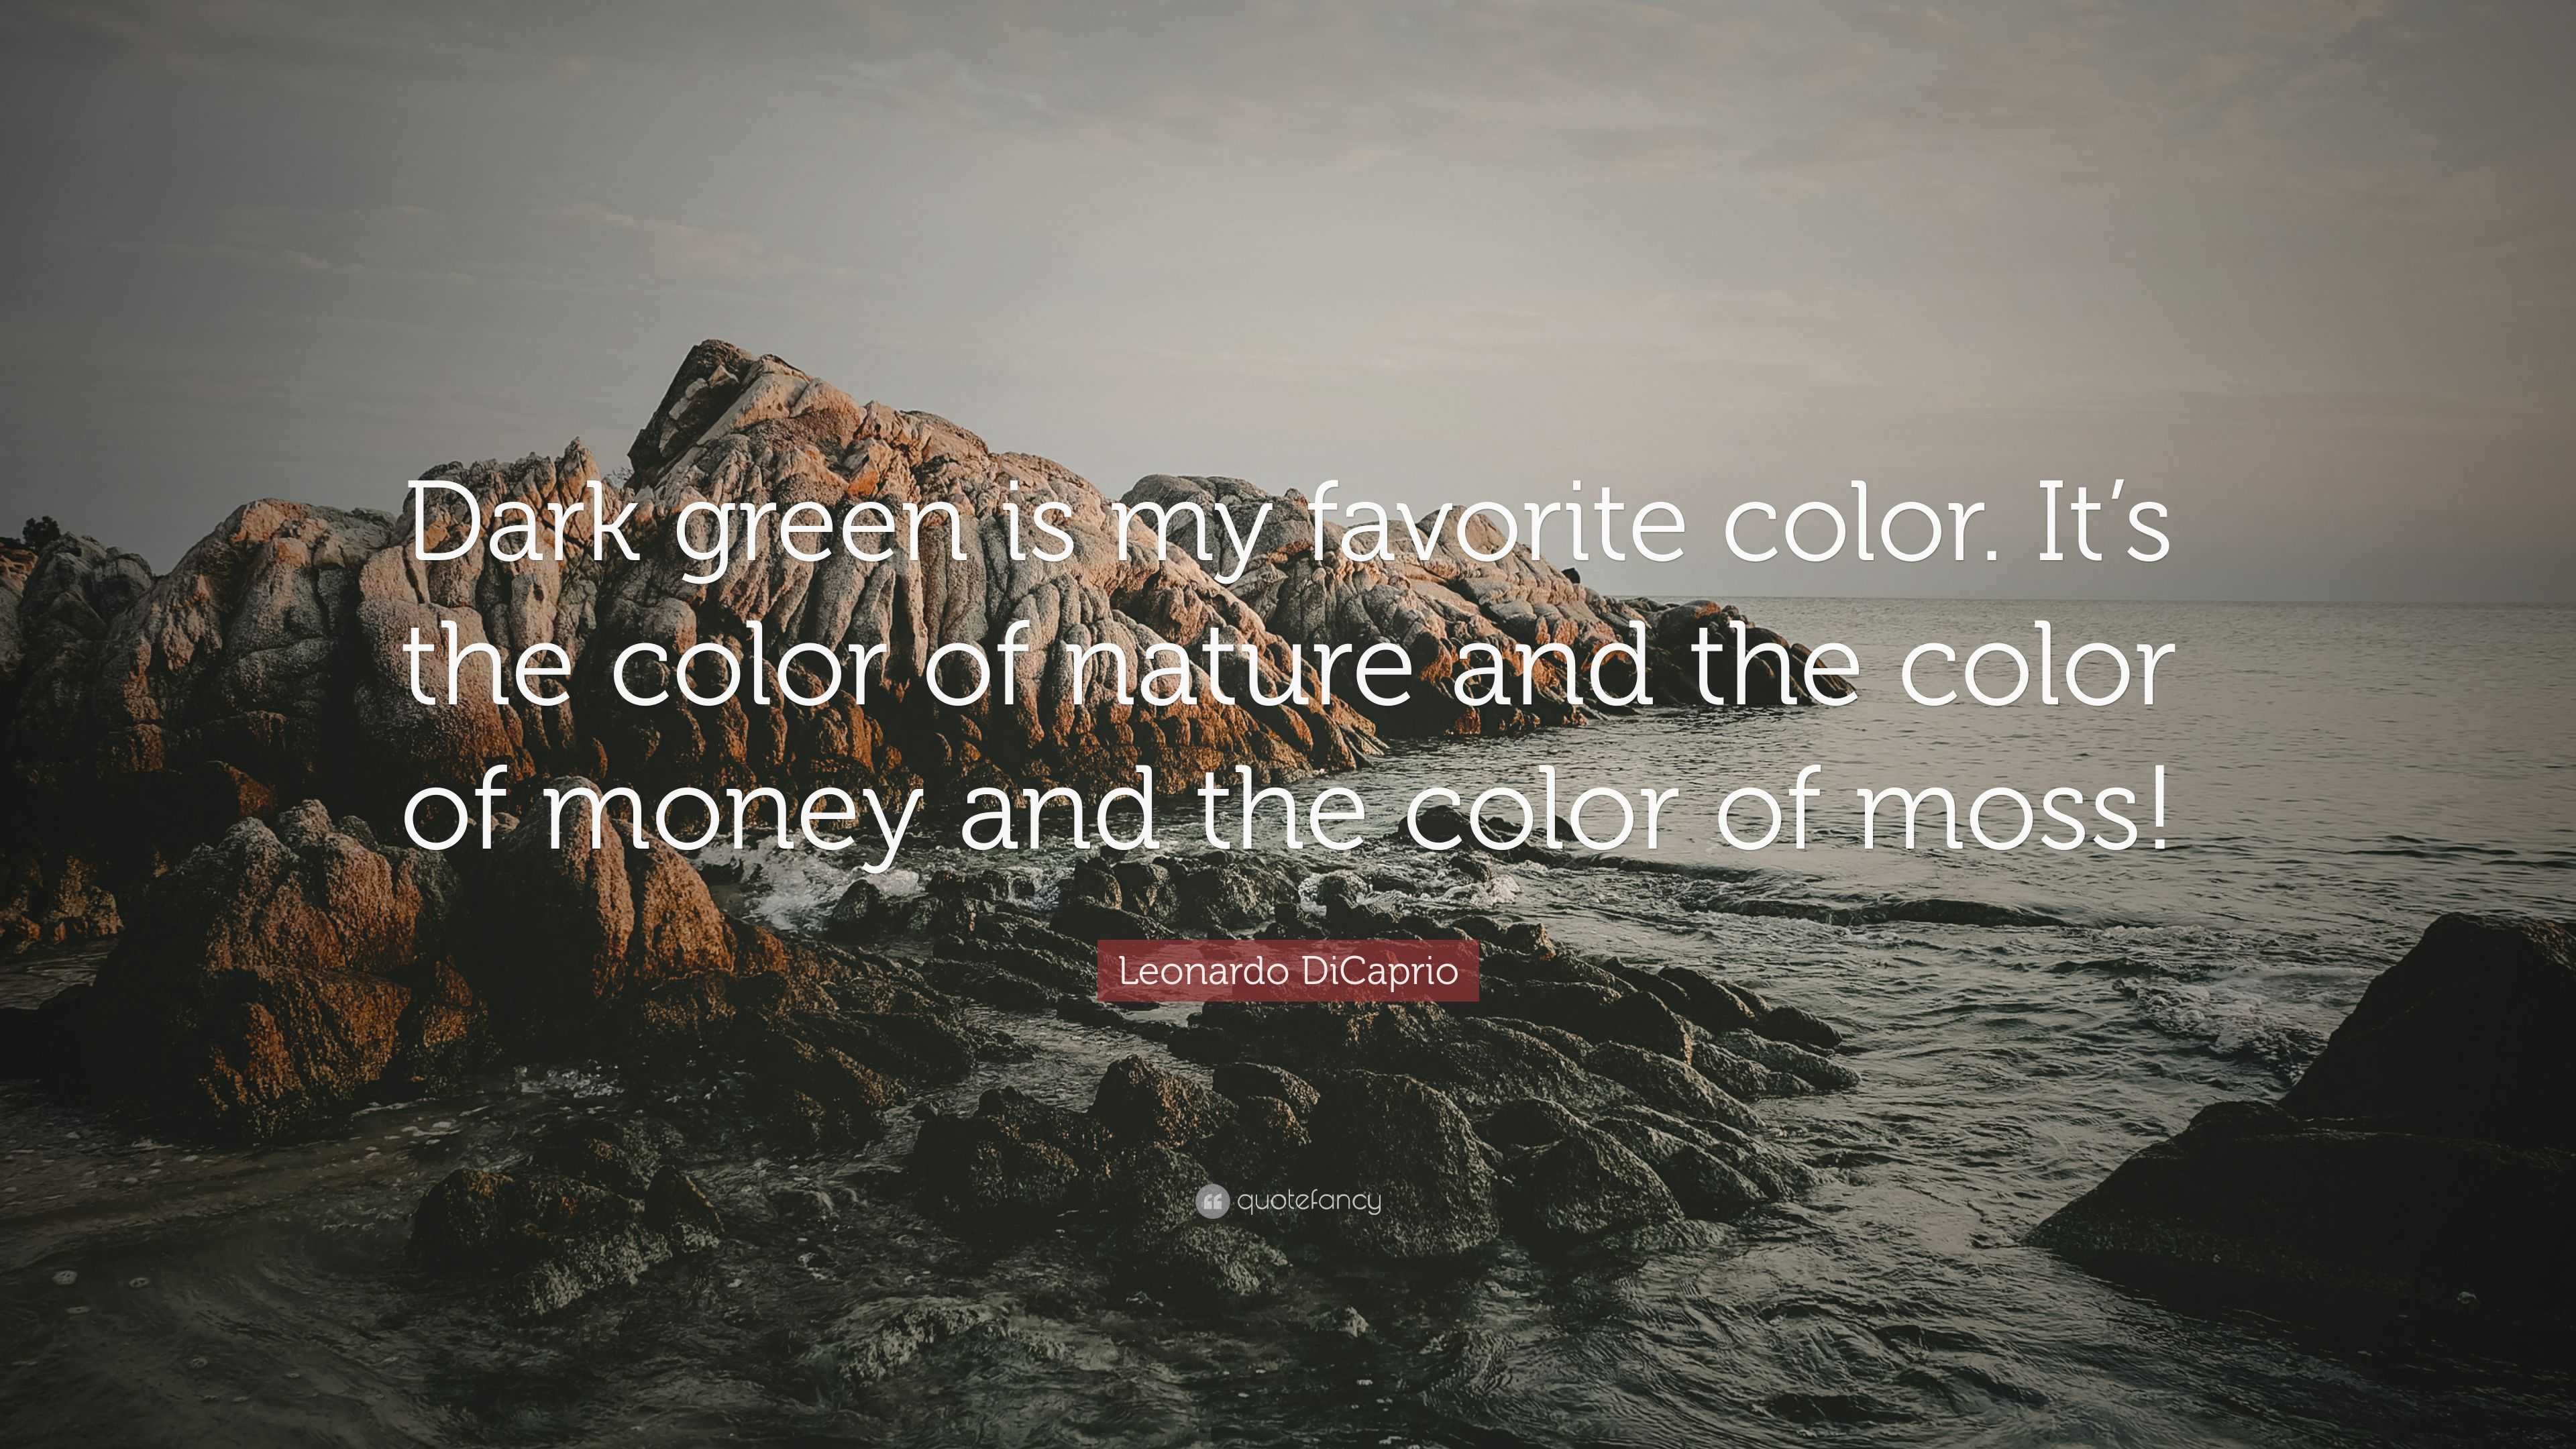 164 Green Quotes About The Color Of Nature & More